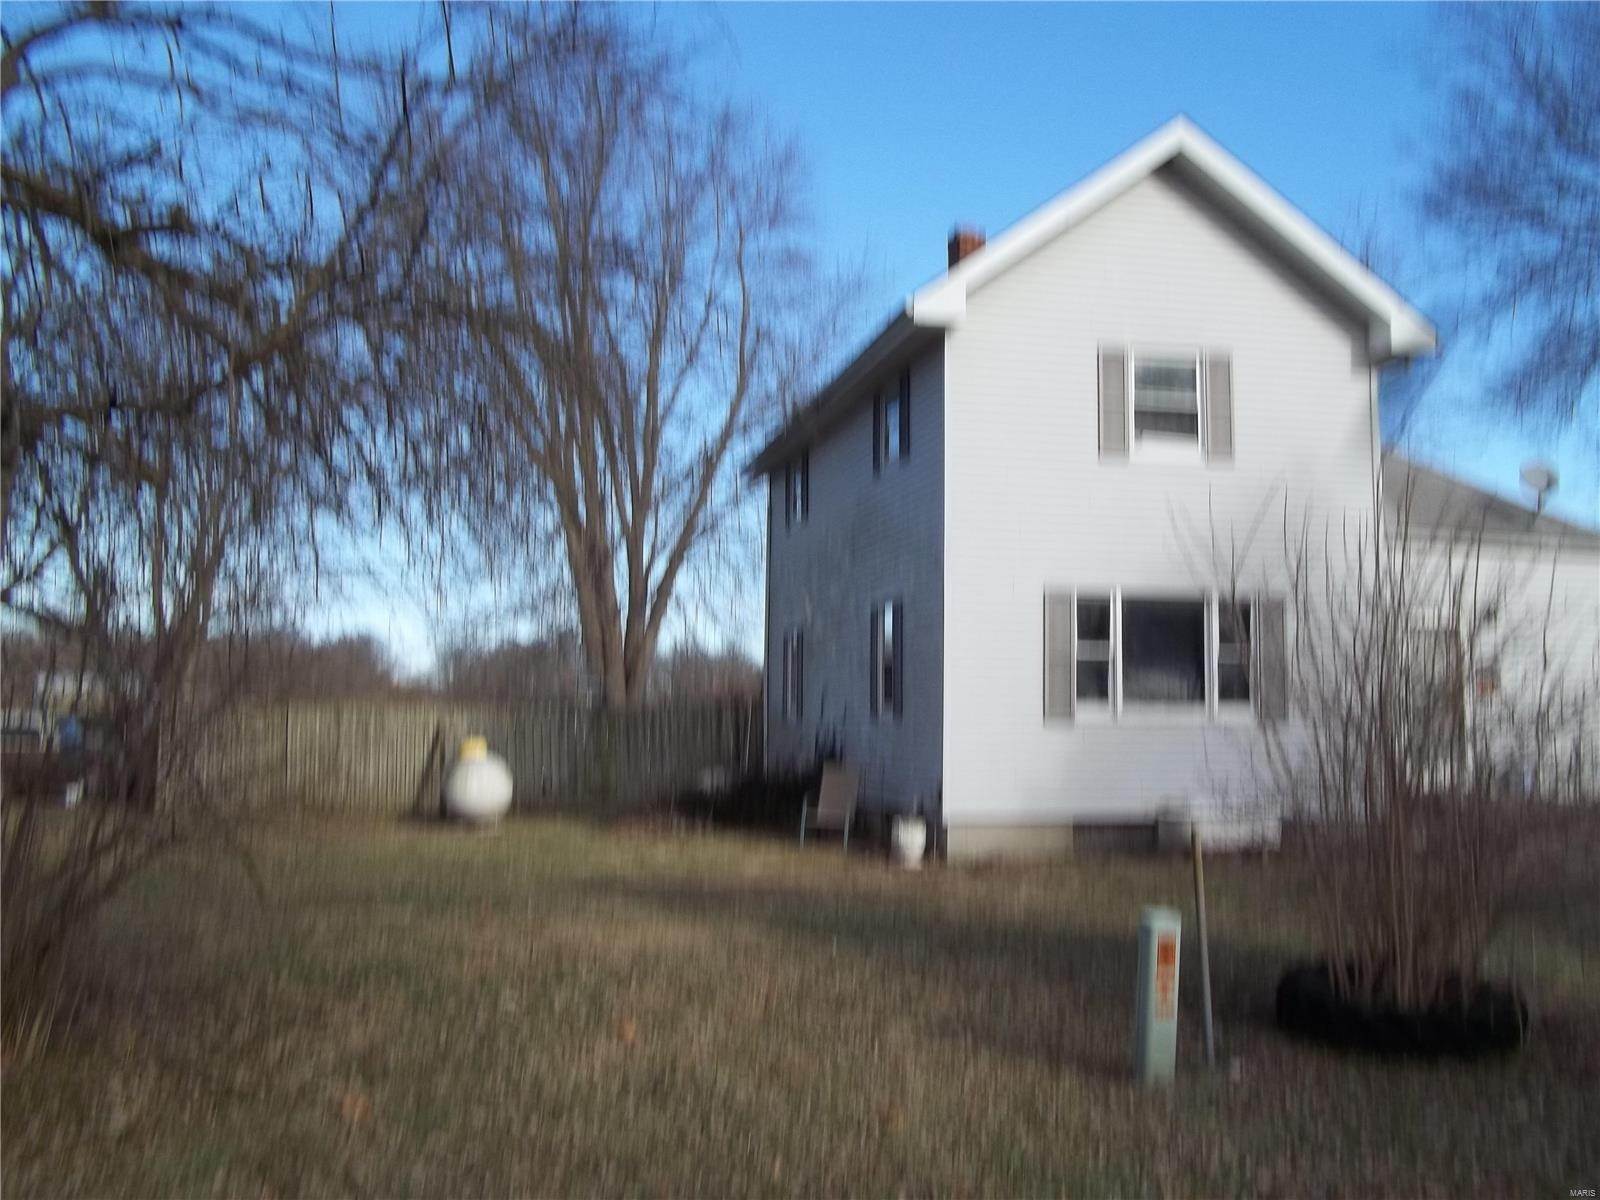 Property for Sale at 11609 Binney Road New Douglas, Illinois 62074 United States